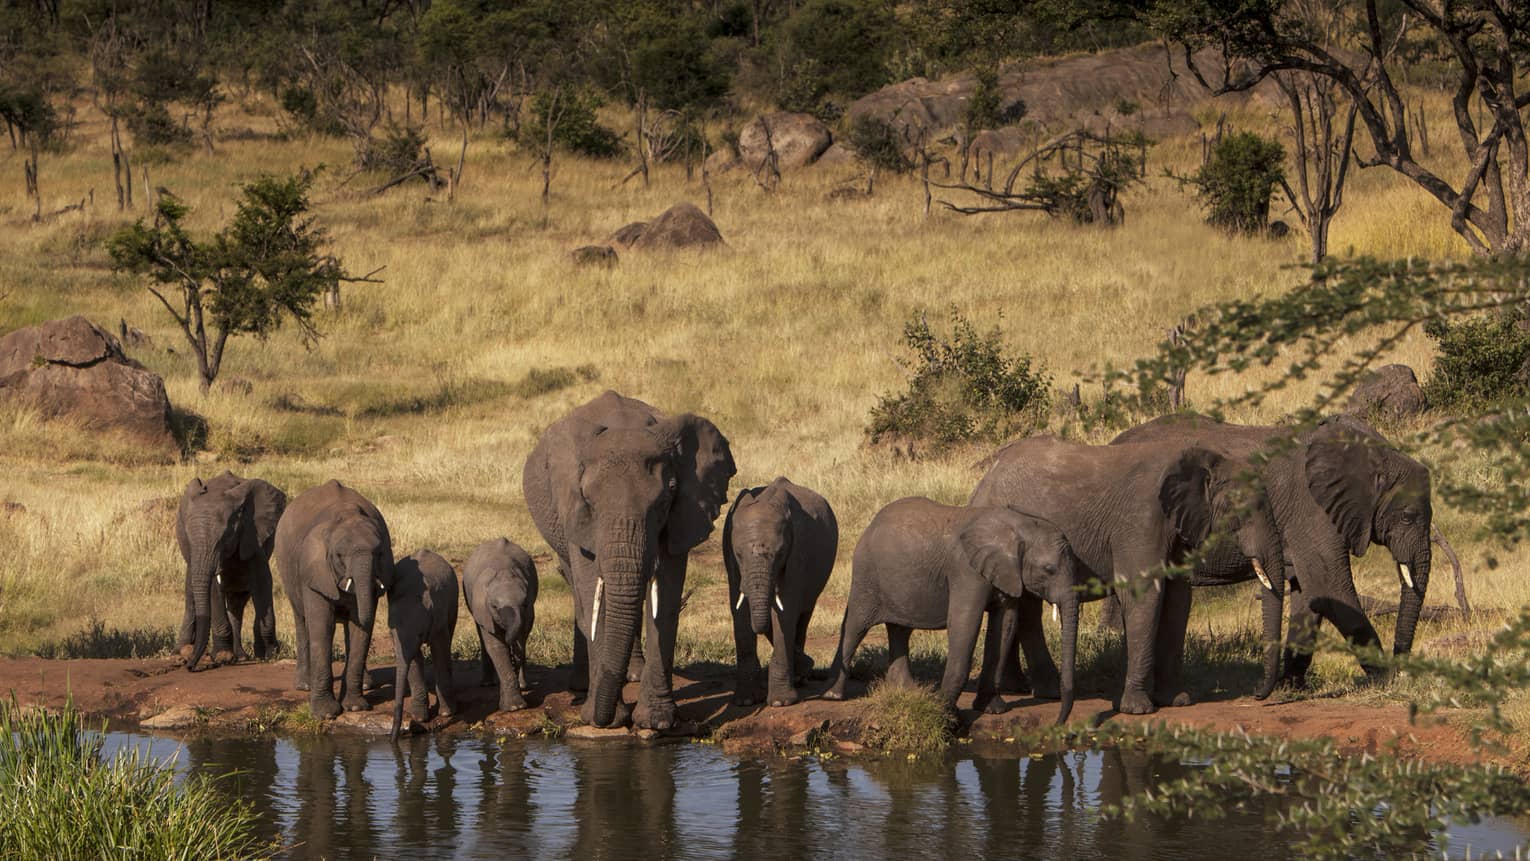 A pack of elephants drinking from a watering hole